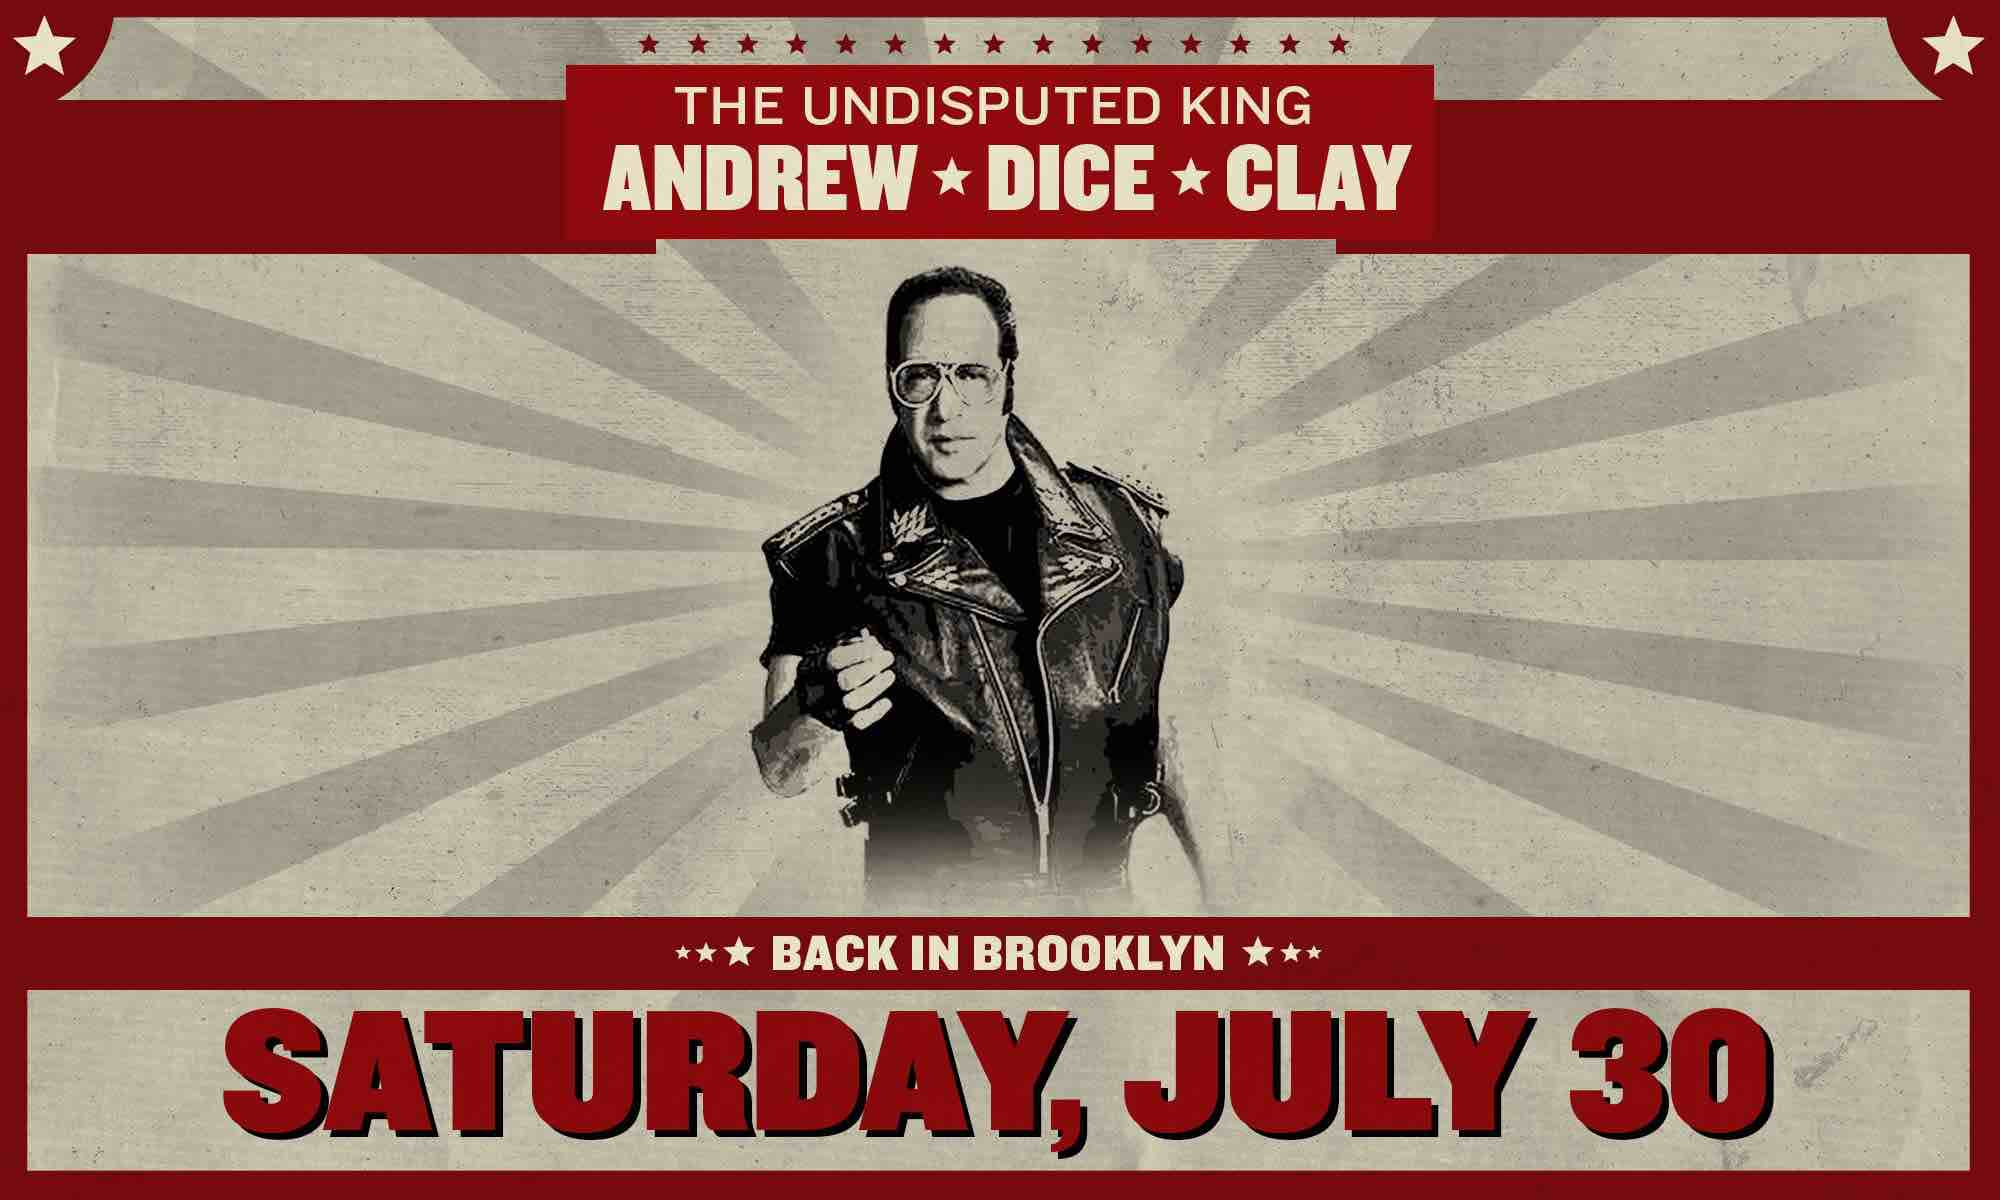 Andrew Dice Clay at Coney Island Amphitheater on 07-30-16